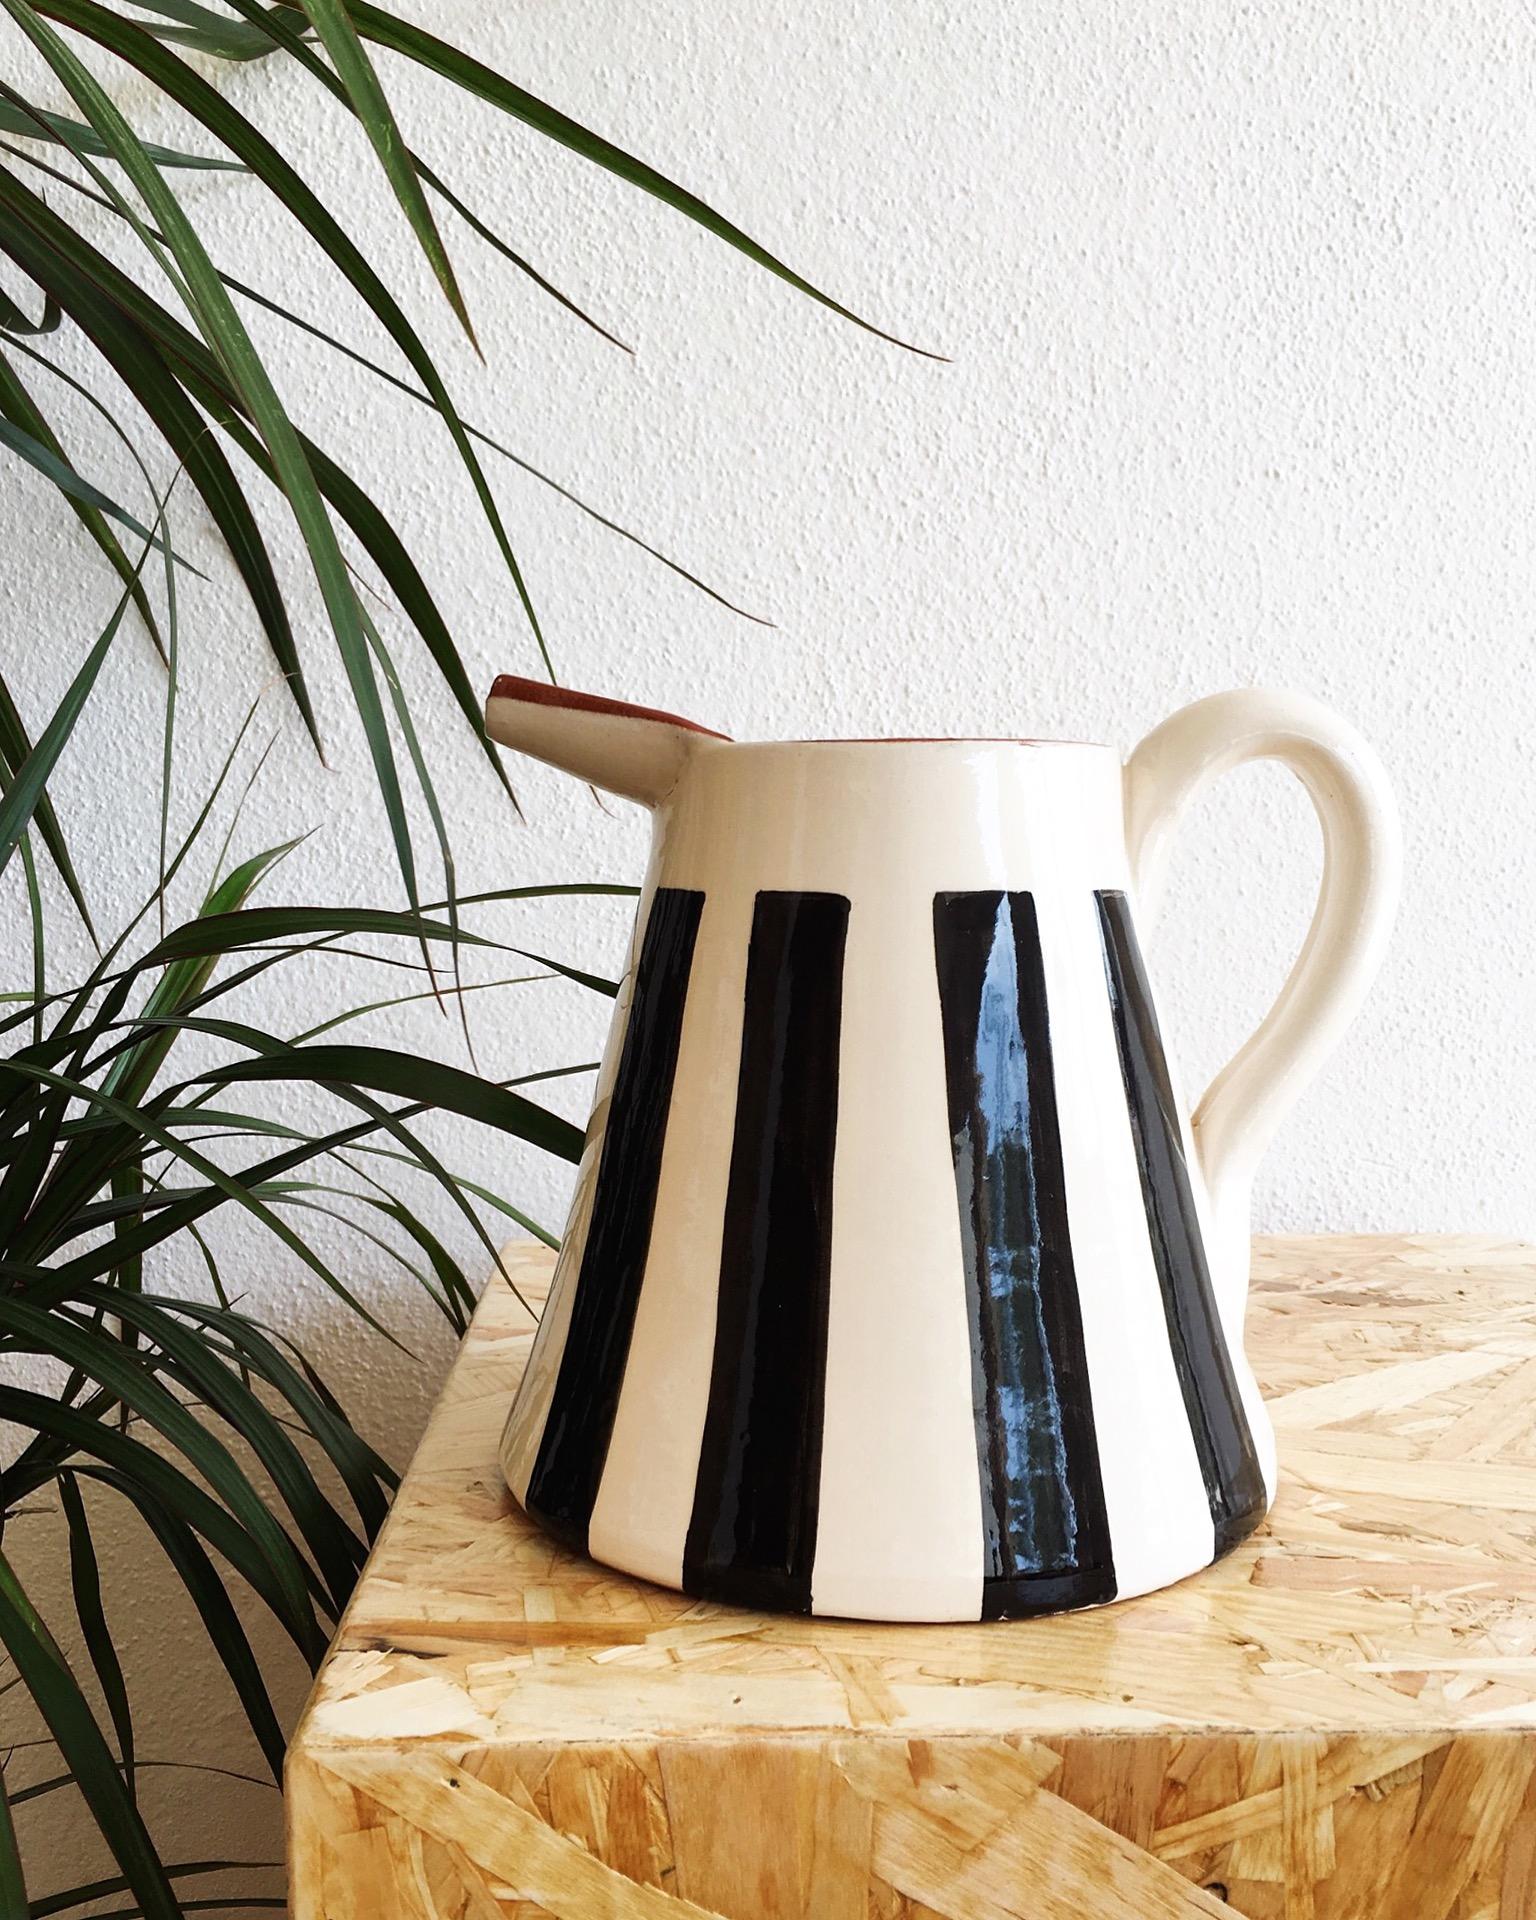 Handmade Ceramic Large Pitcher with Graphic Black and White Design, in Stock 2